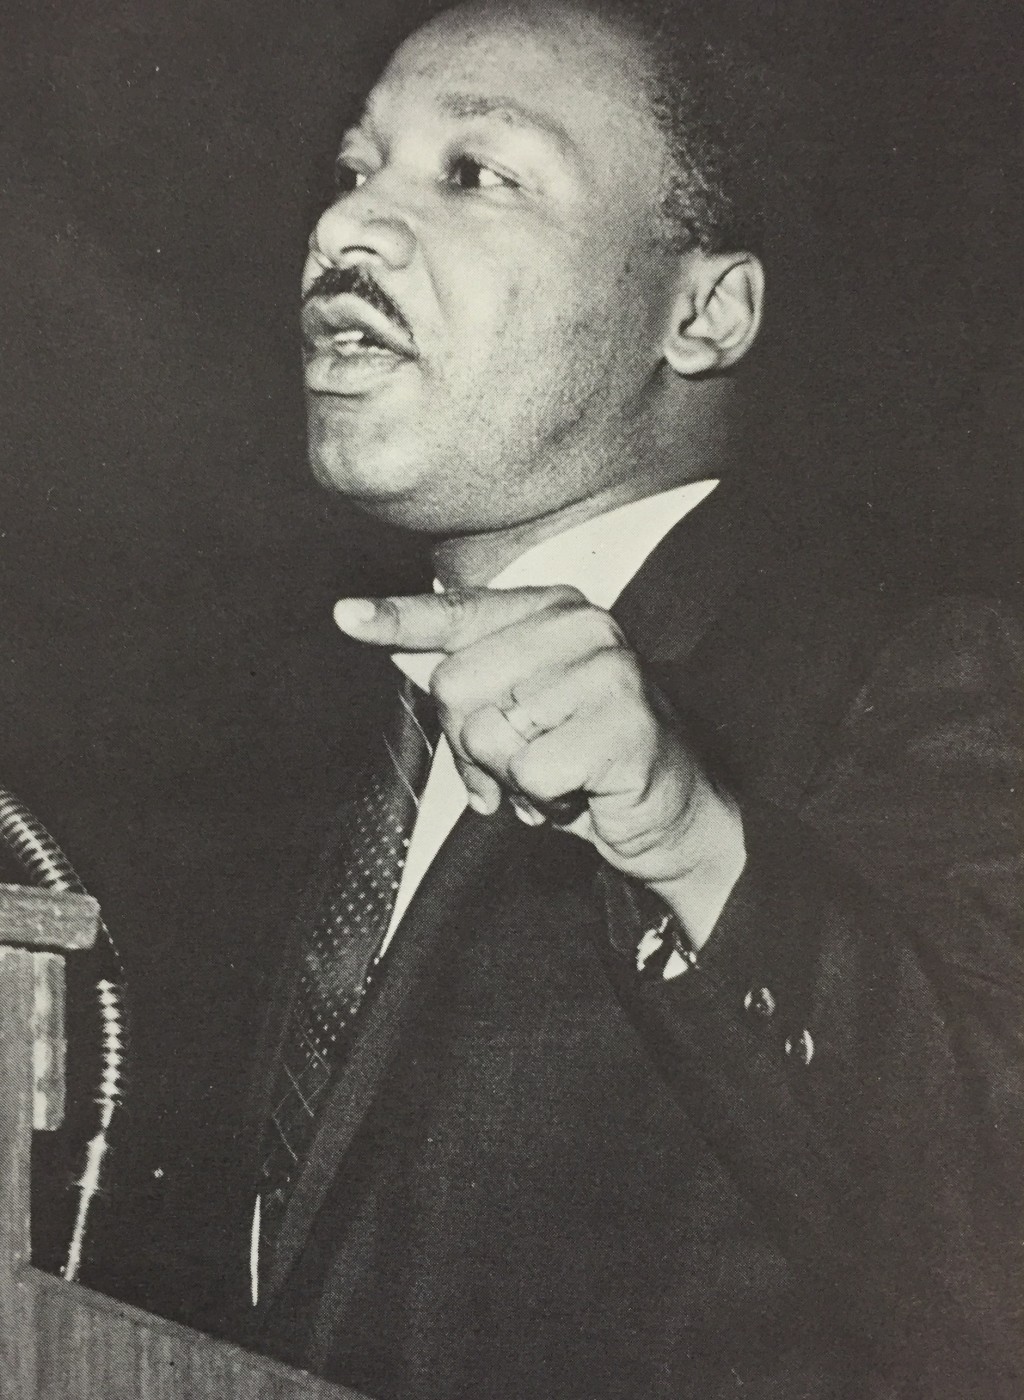 Dr. Martiin Luther King Jr. discusses the future of the civil rights movement at the 1967 Allied Educational Foundation conference